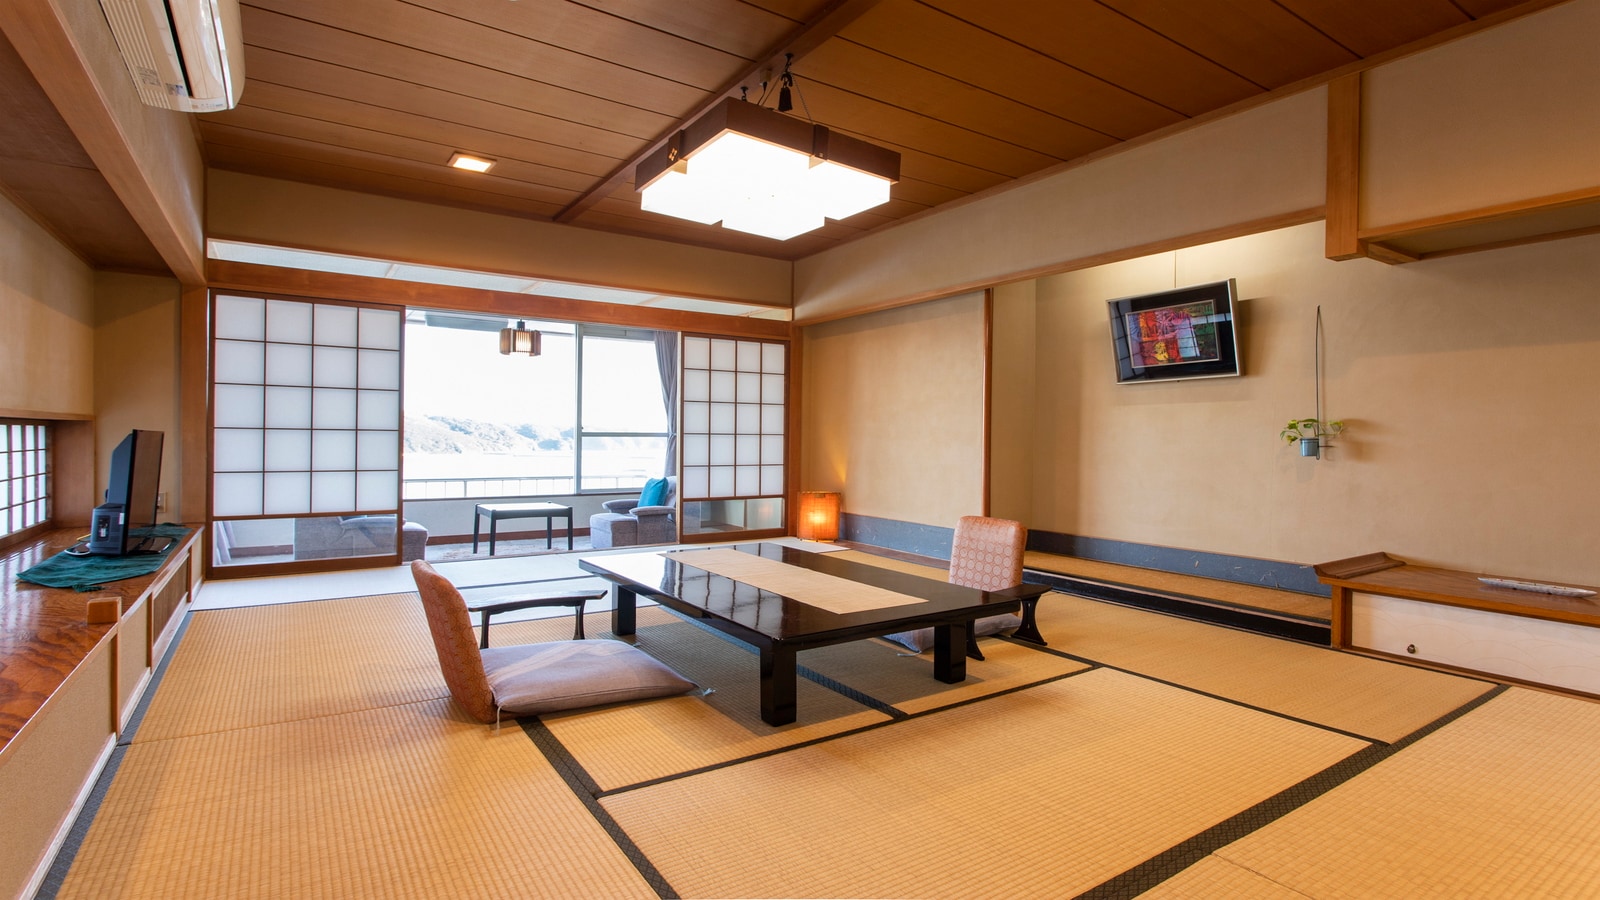 ■ Center building general guest room ■ 43㎡ Japanese-style room 12 tatami mats + wide rim, with bath and toilet